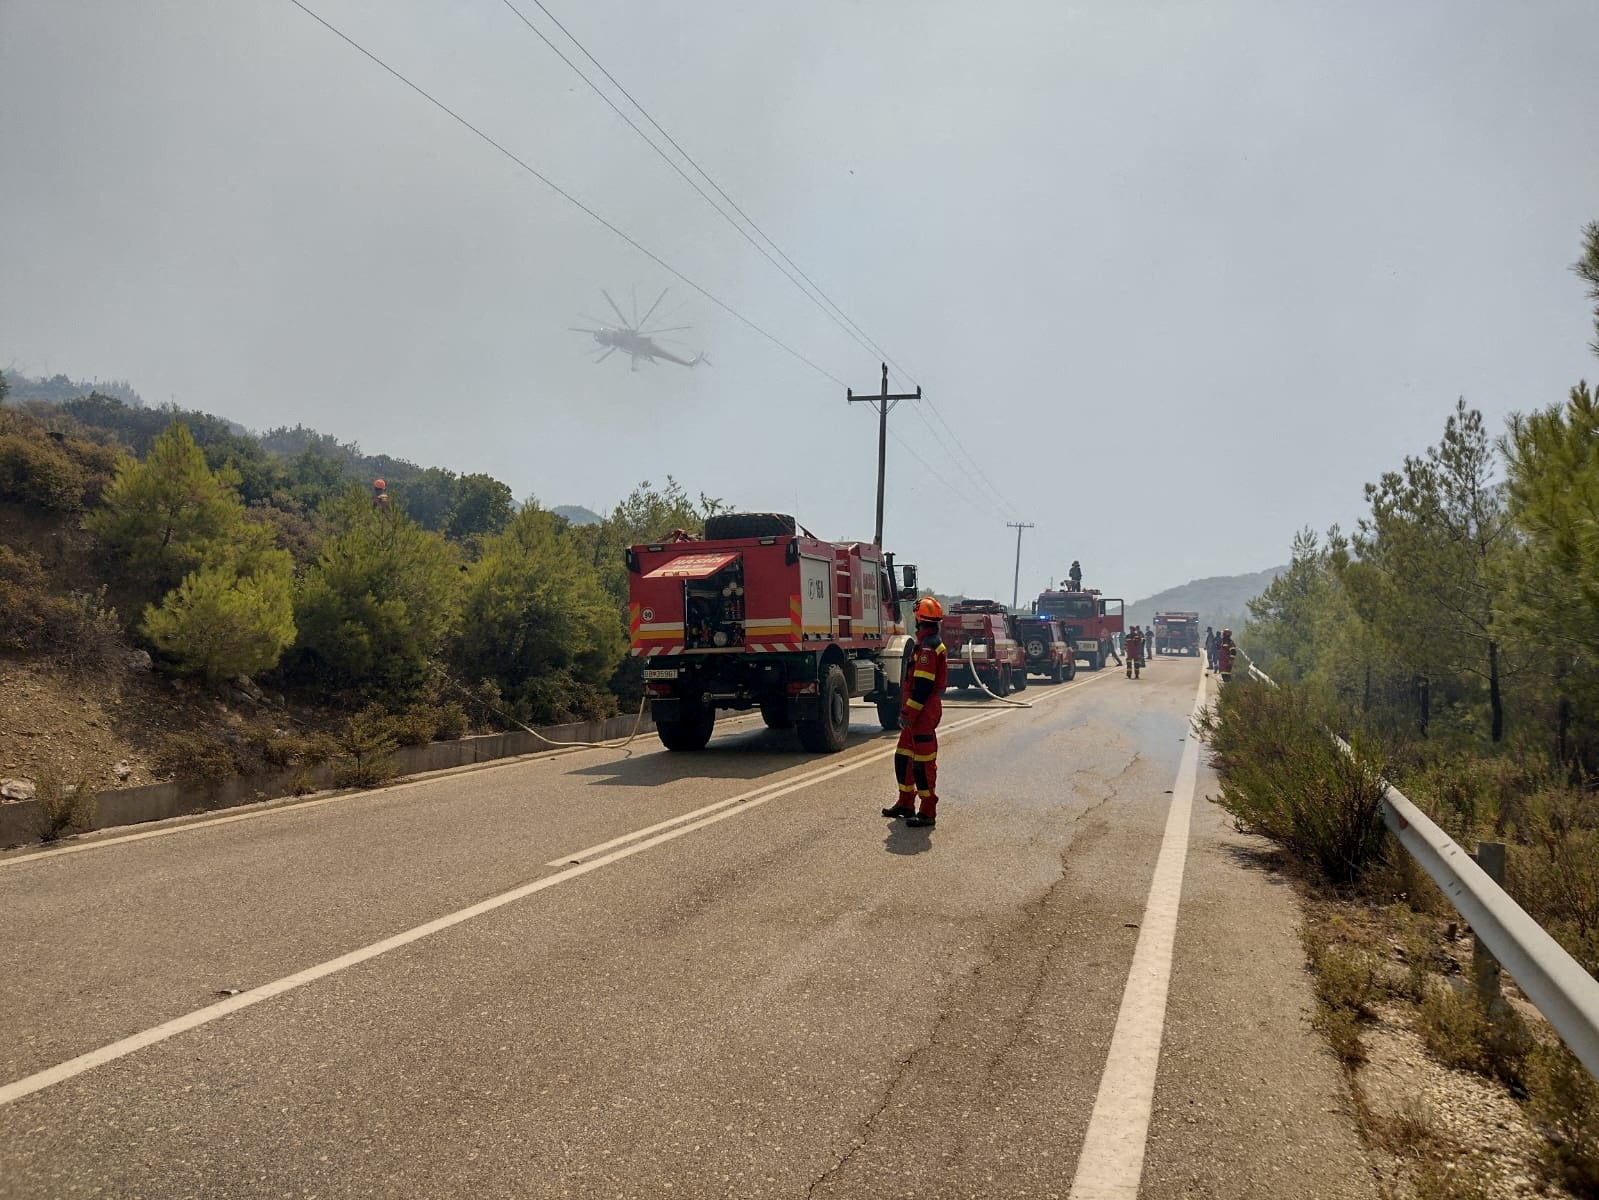 Firefighters try to extinguish a wildfire burning near Laerma, Rhodes Island